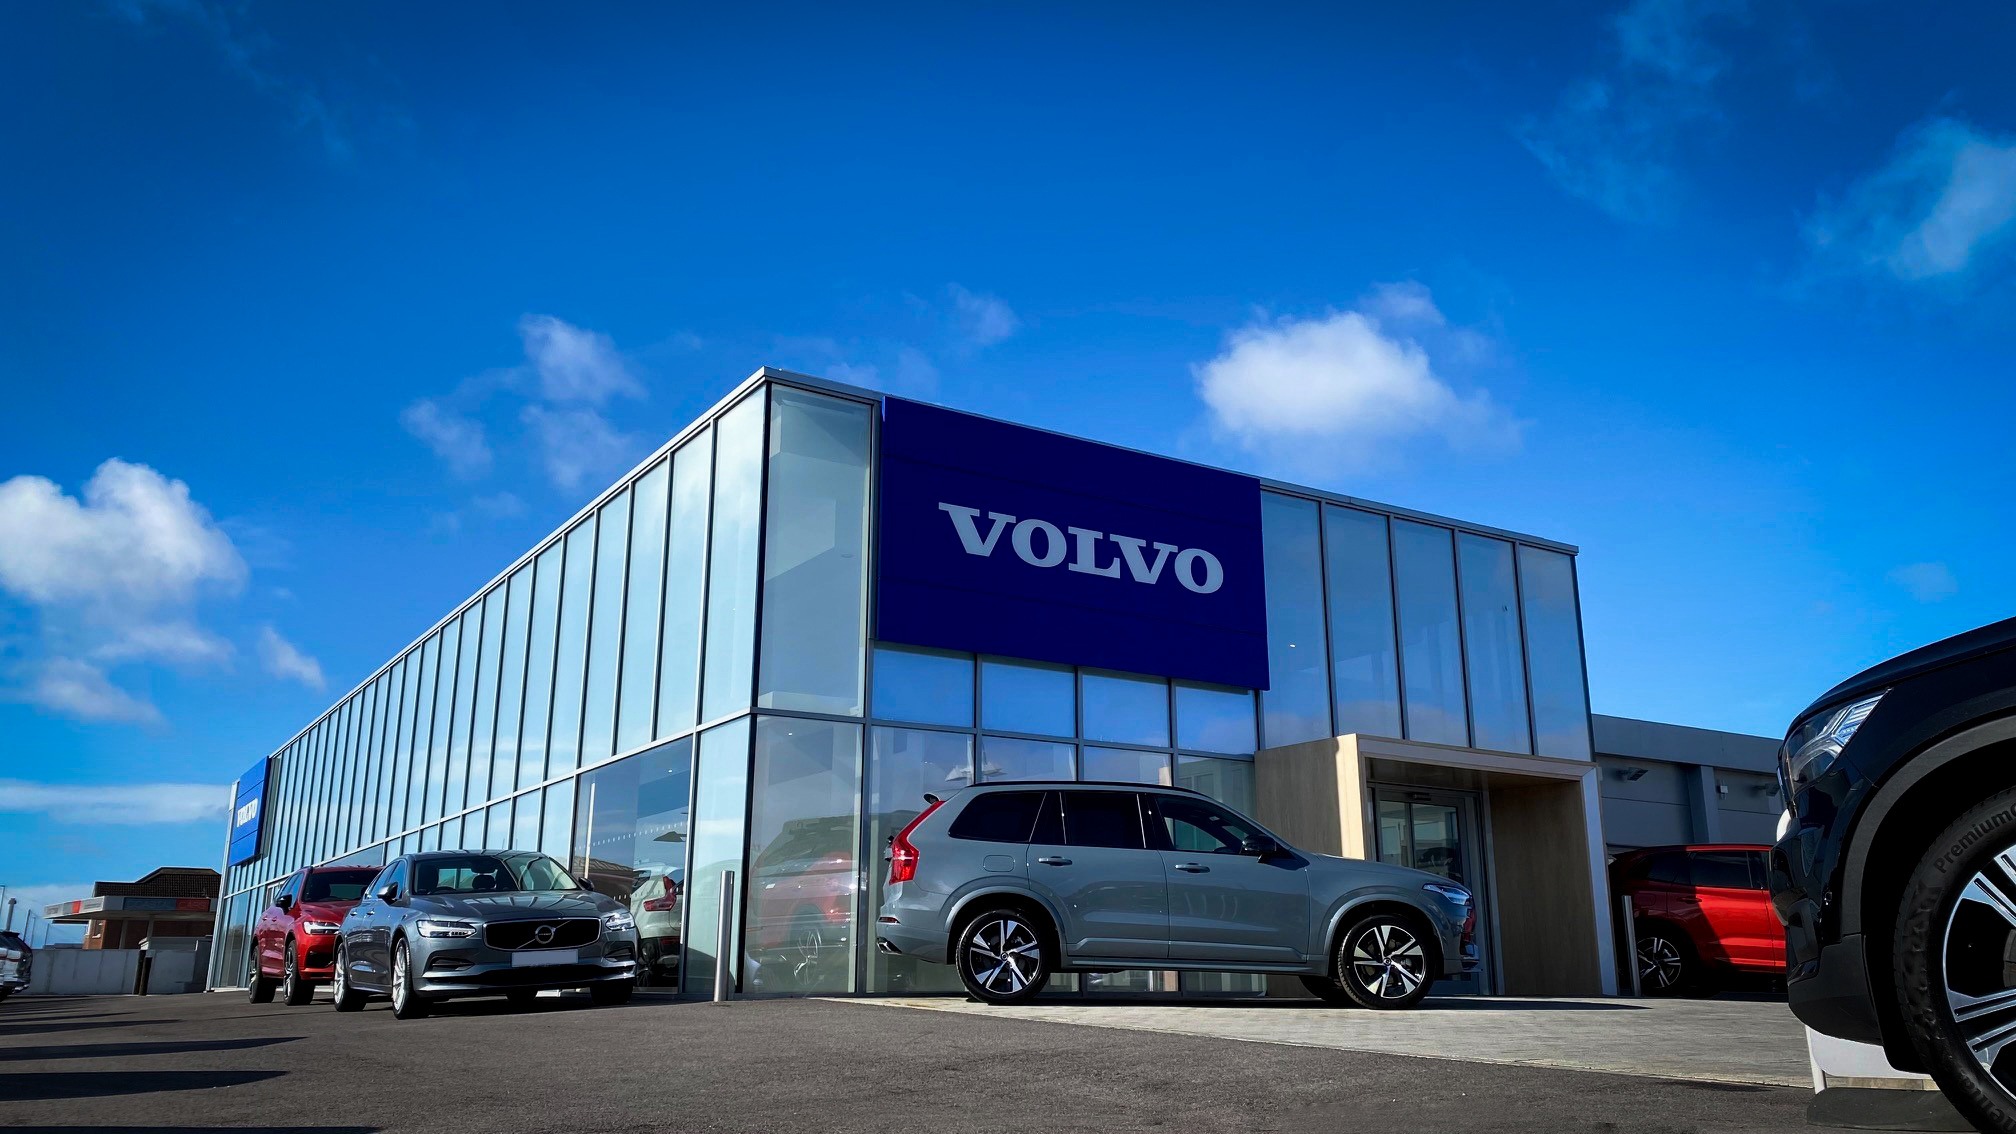 Extended lead times for new Volvo orders